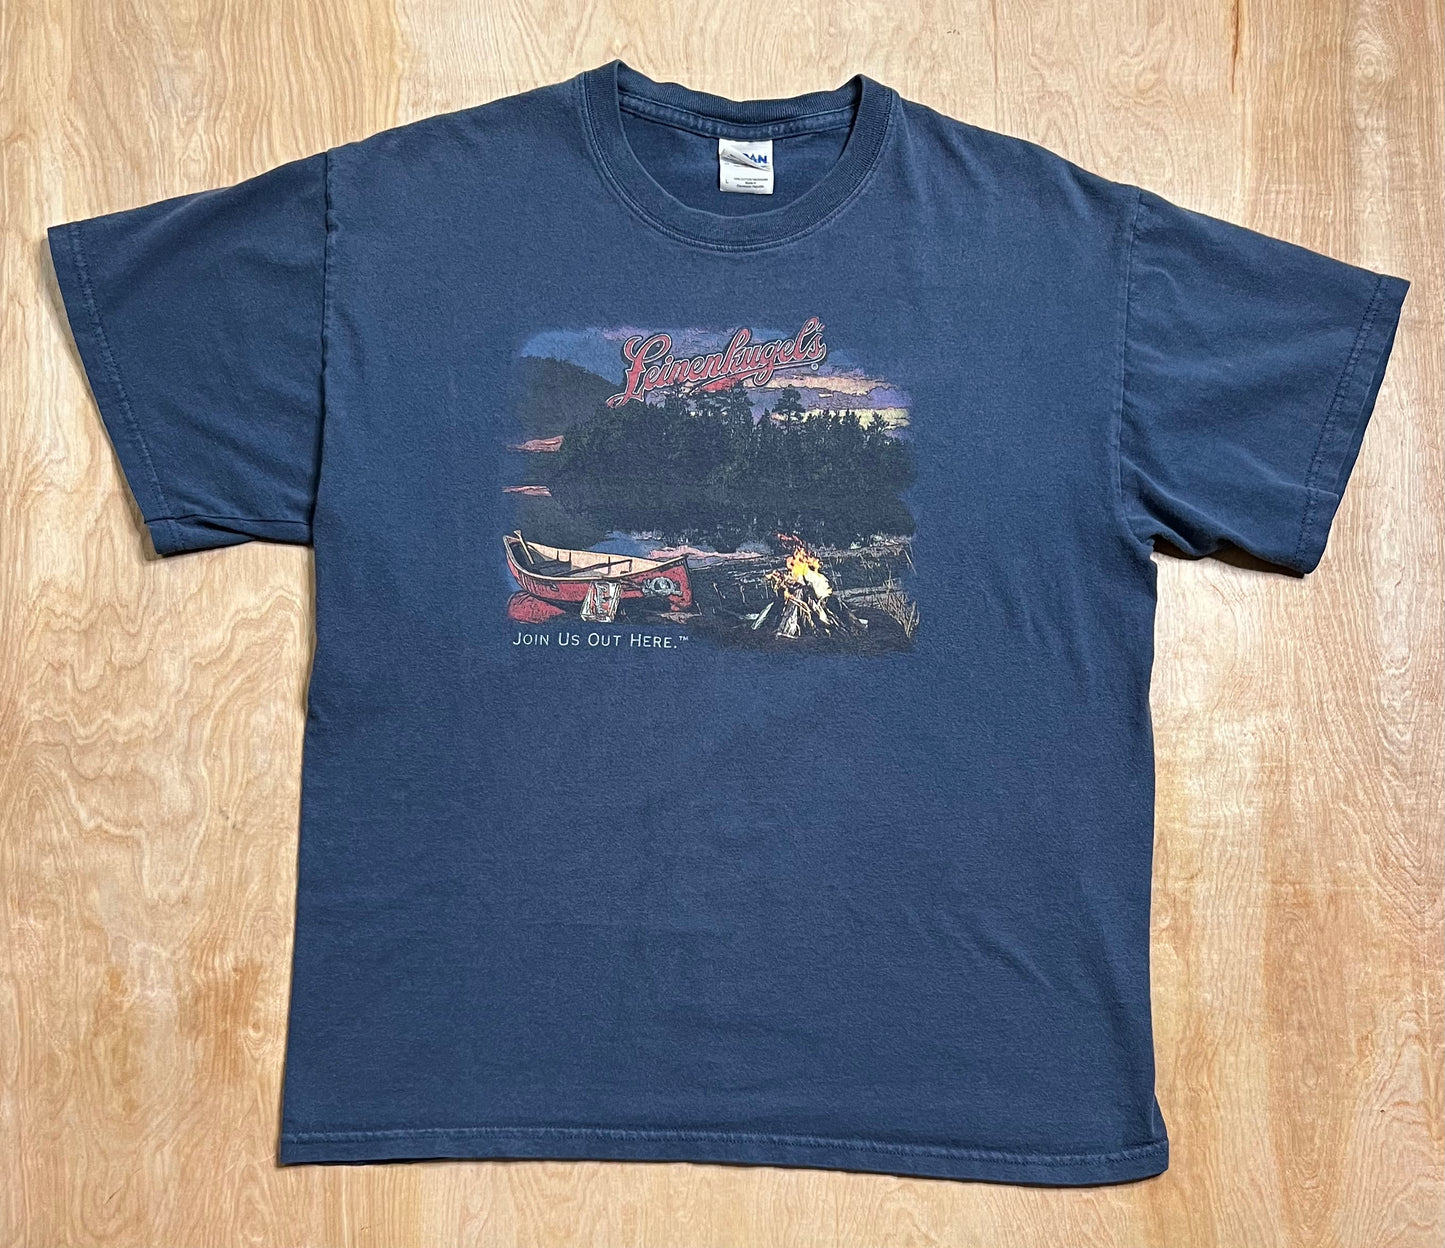 Vintage Leinenkugels "Join us out here" T-Shirt